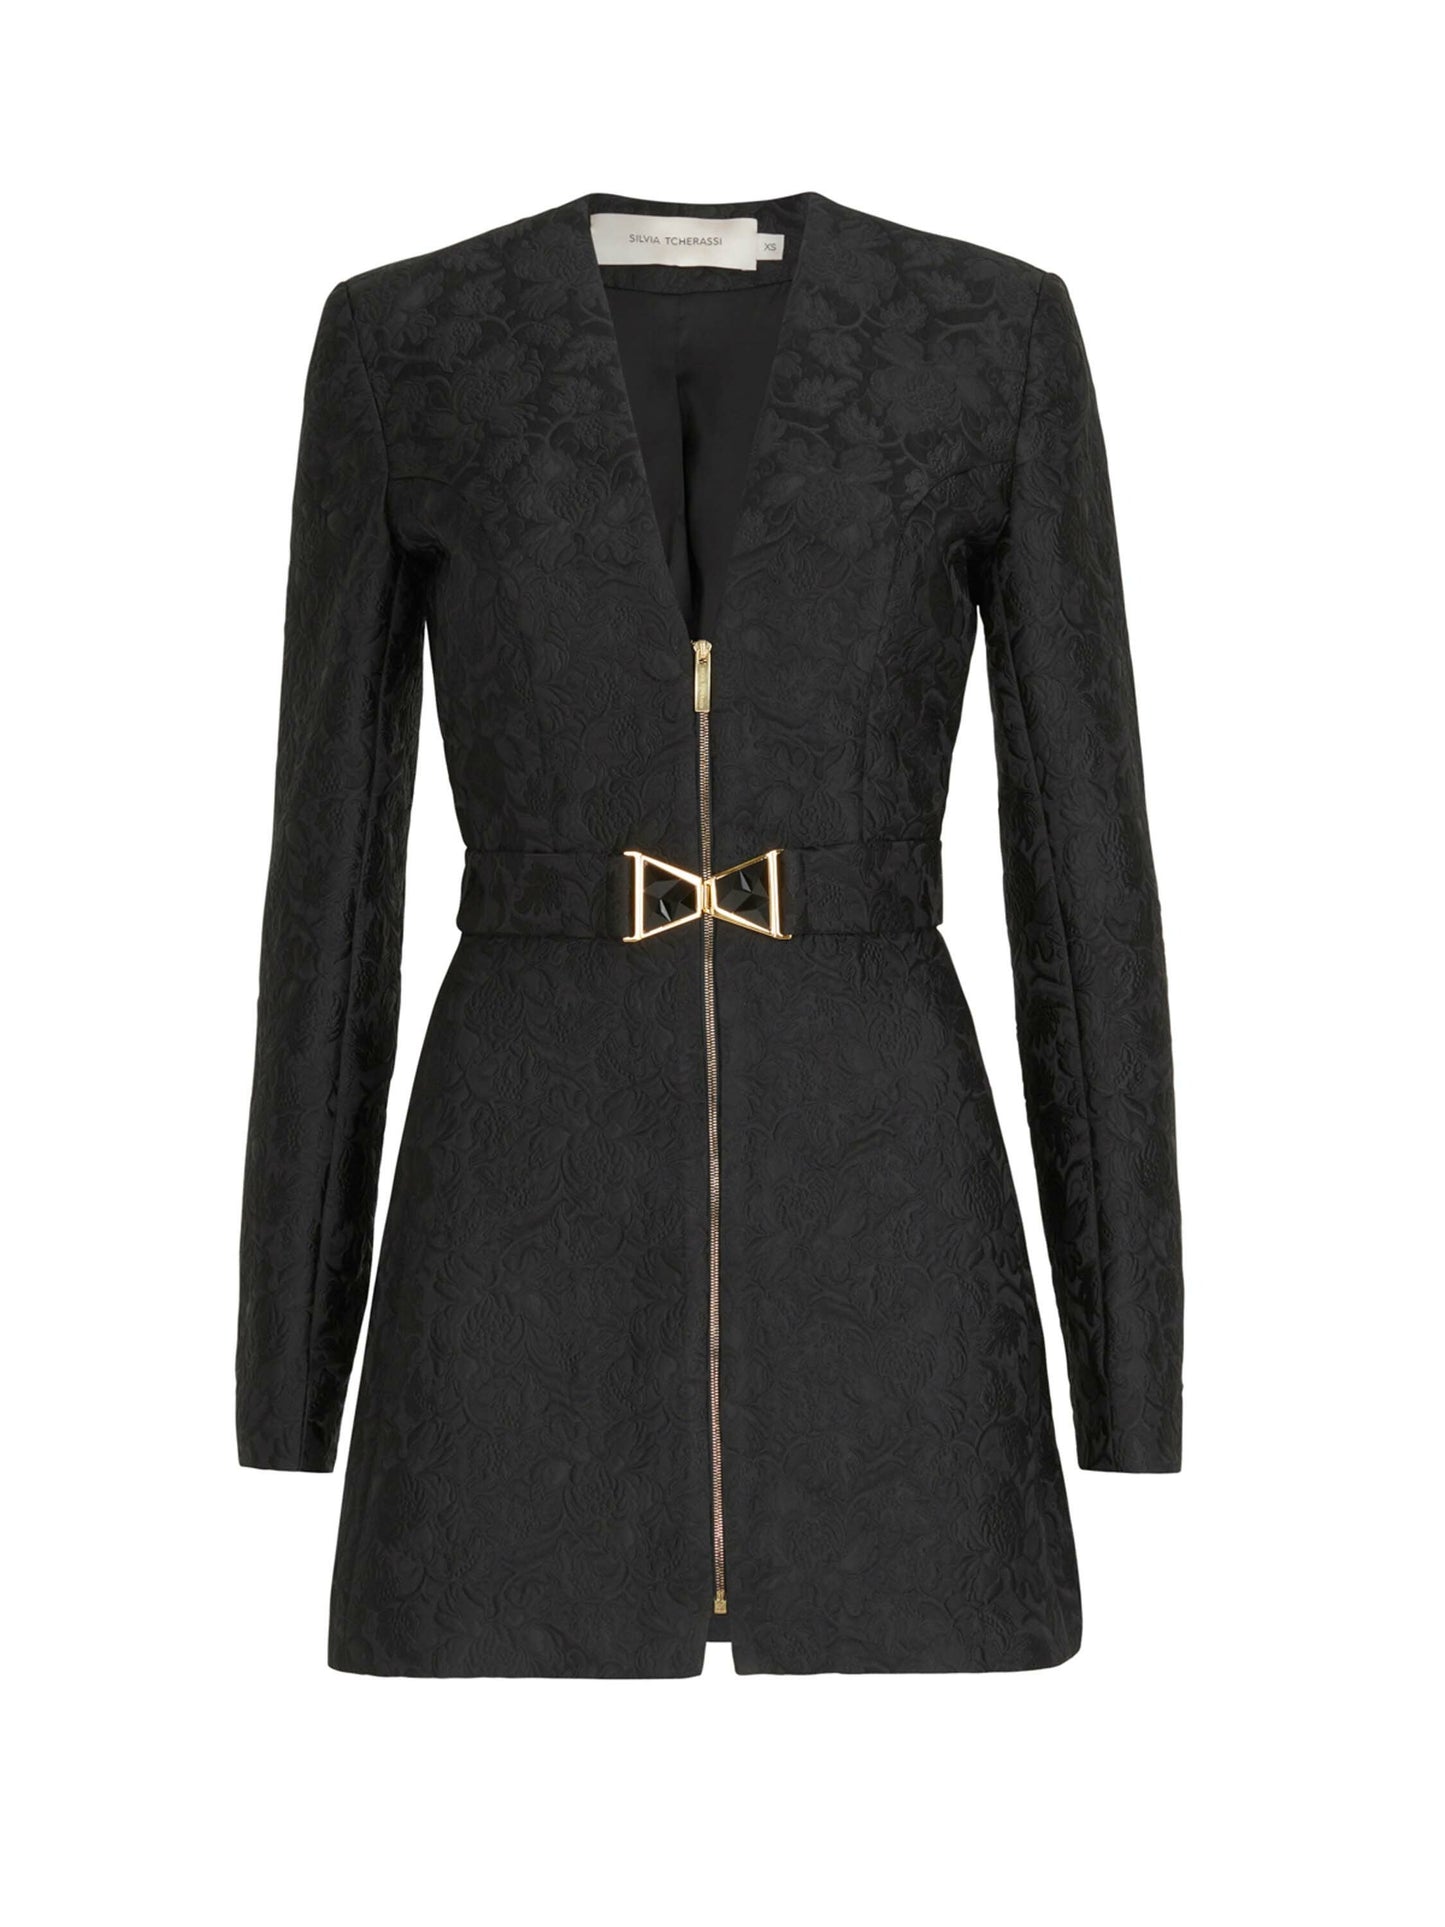 A Romana Dress Black with golden buckles.